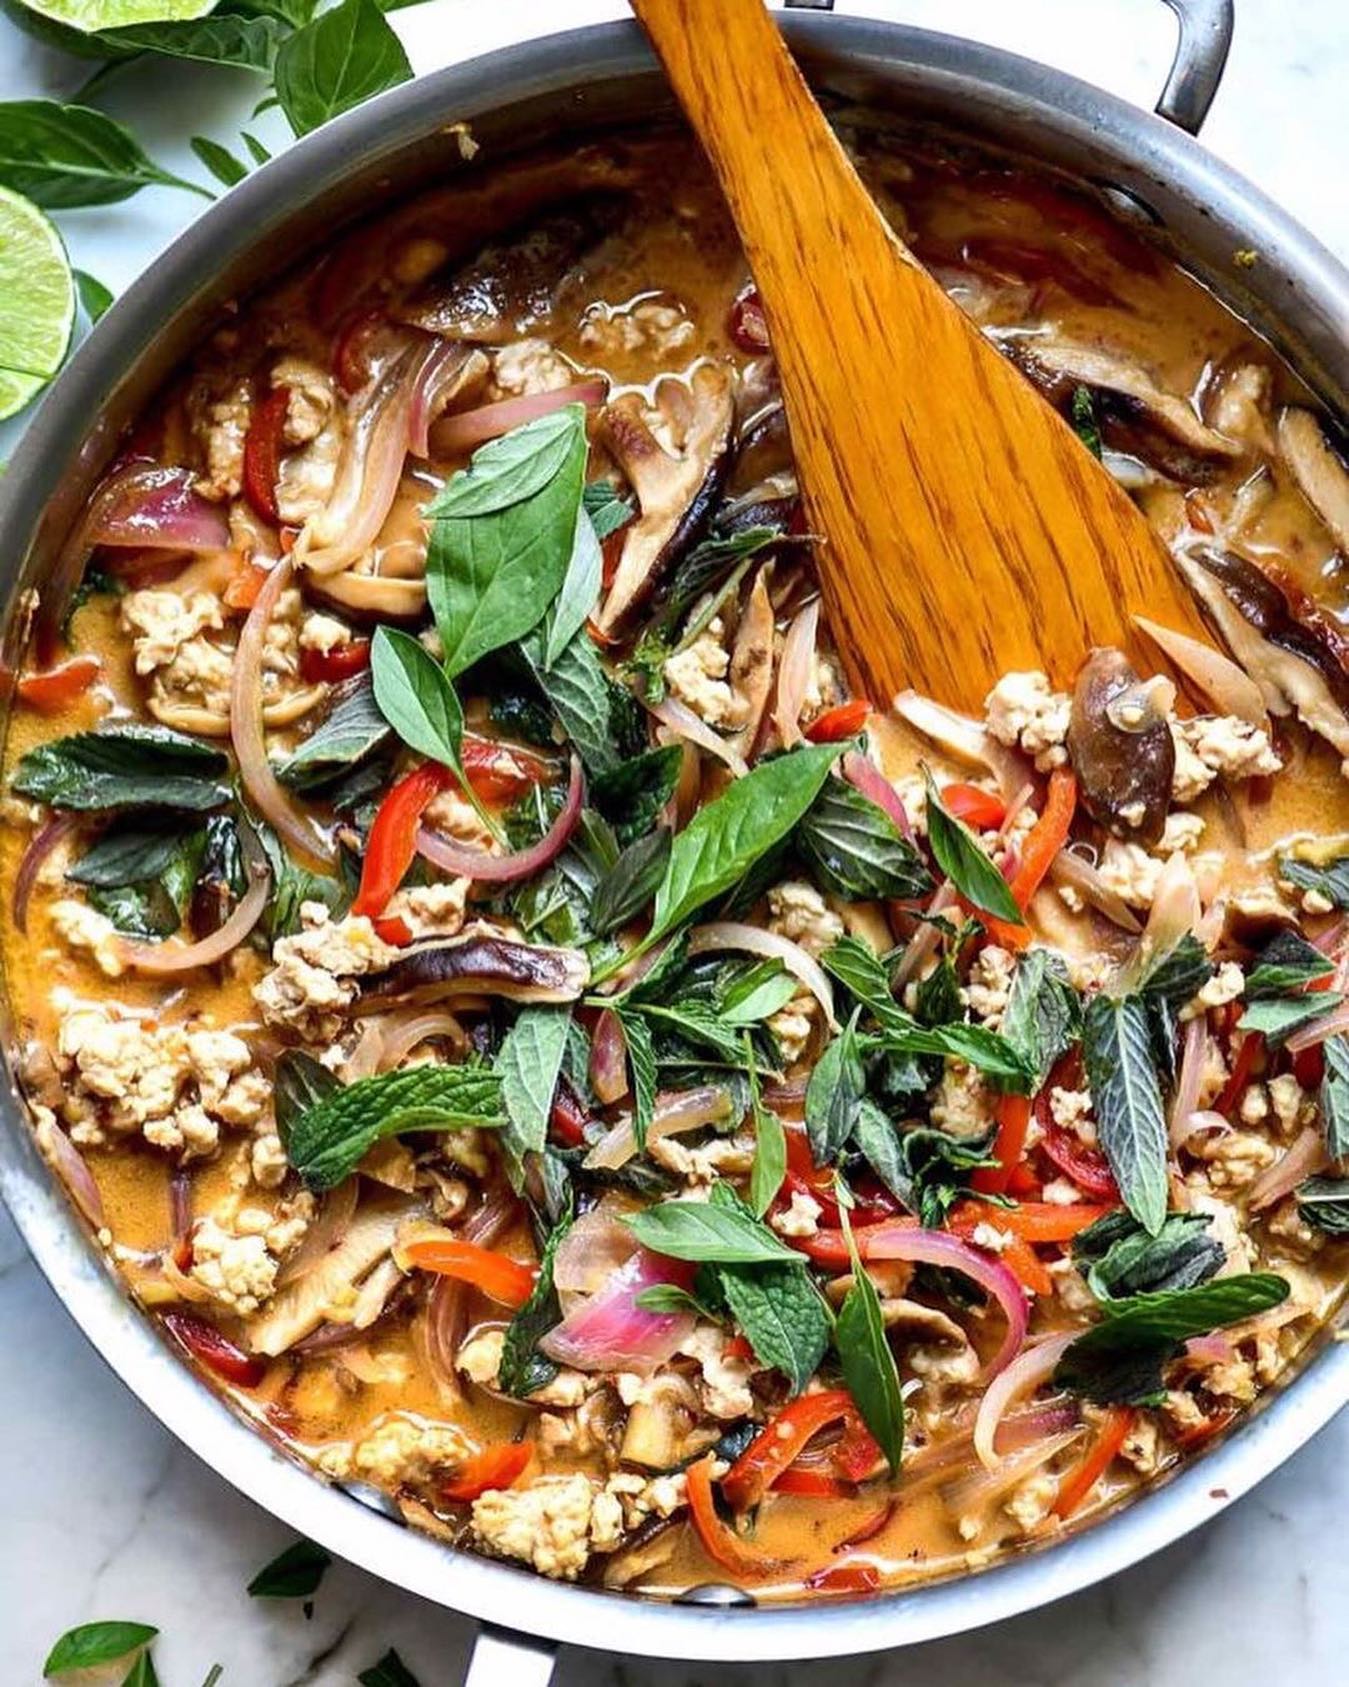 Follow @pdrecipes • @foodiecrush Every year I grow Thai basil just so I can make this Thai basil chicken recipe. Simmered in a lush coconut sauce spiced with Thai chili paste, the ground chicken, red bell peppers, mushrooms, and onion take on all the delicious Thai flavors. Serve it over rice or noodles or why not both. With frost soon in the forecast, it's on repeat at our house and I made it last night for my Instagram stories too. Tap the link in my profile and search Thai basil chicken for the recipe. 

#foodiecrush #foodiecrusheats #thaibasil #thaifood #dinnerwithfriends #garden #madeinblue #foodie #foodlover #foodporn #foodphotography #yummy #instaplace #mysofia #goodvibes #mondaymood #flatlay #flatlayforever #flatlayoftheday #goodvibes #tableview #colours #instacolours #salad #vegetables #foody #photooftheday